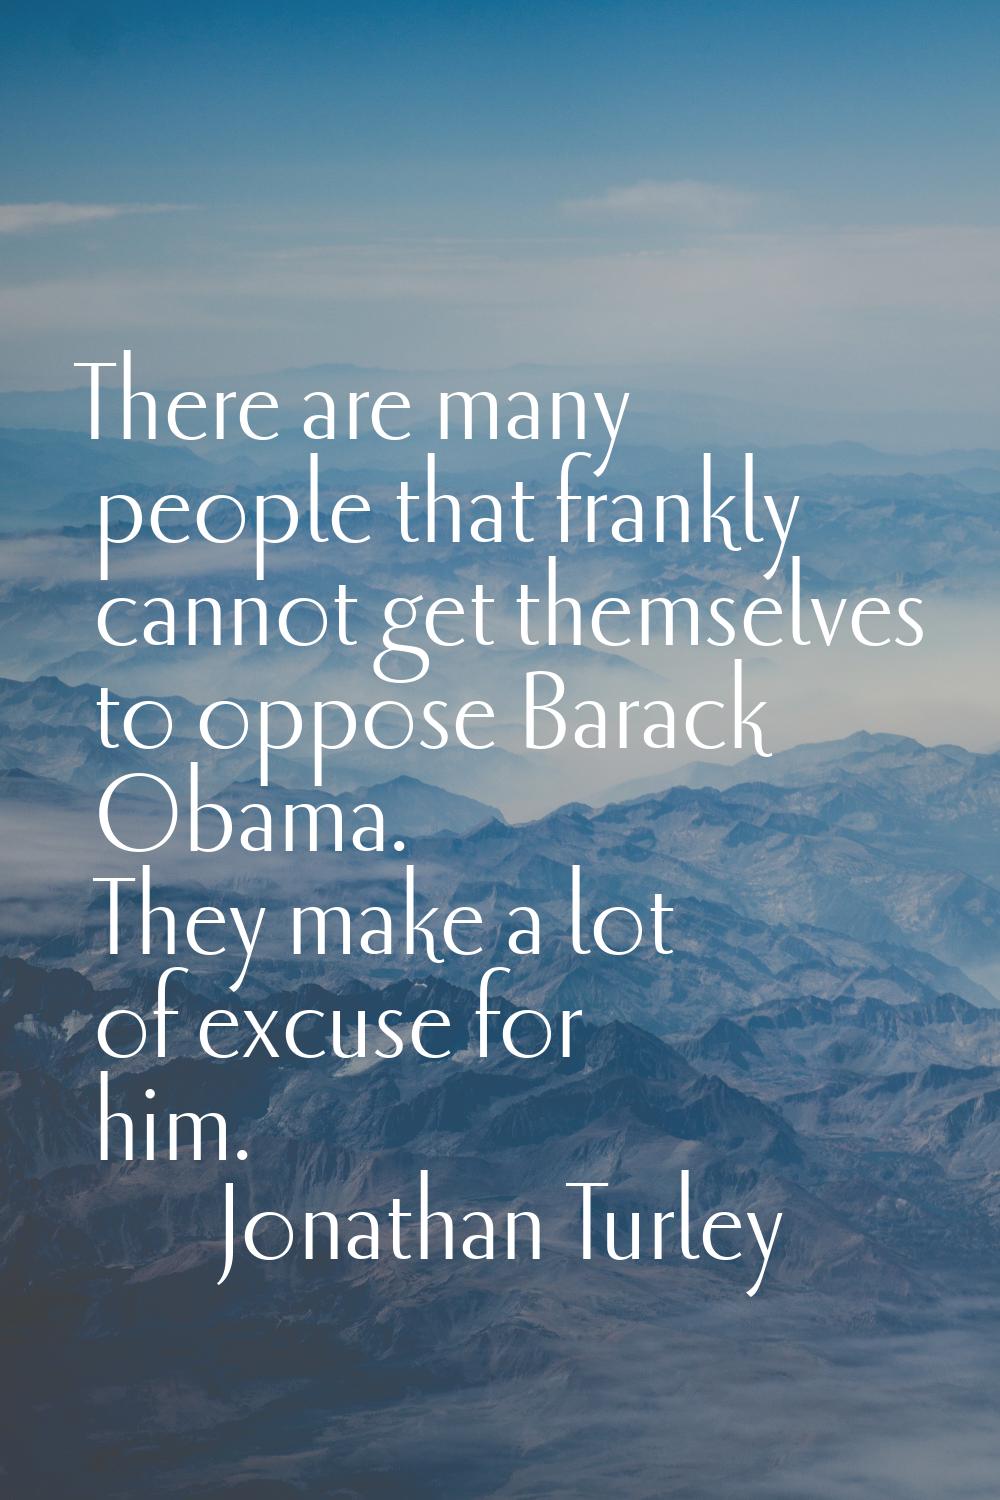 There are many people that frankly cannot get themselves to oppose Barack Obama. They make a lot of